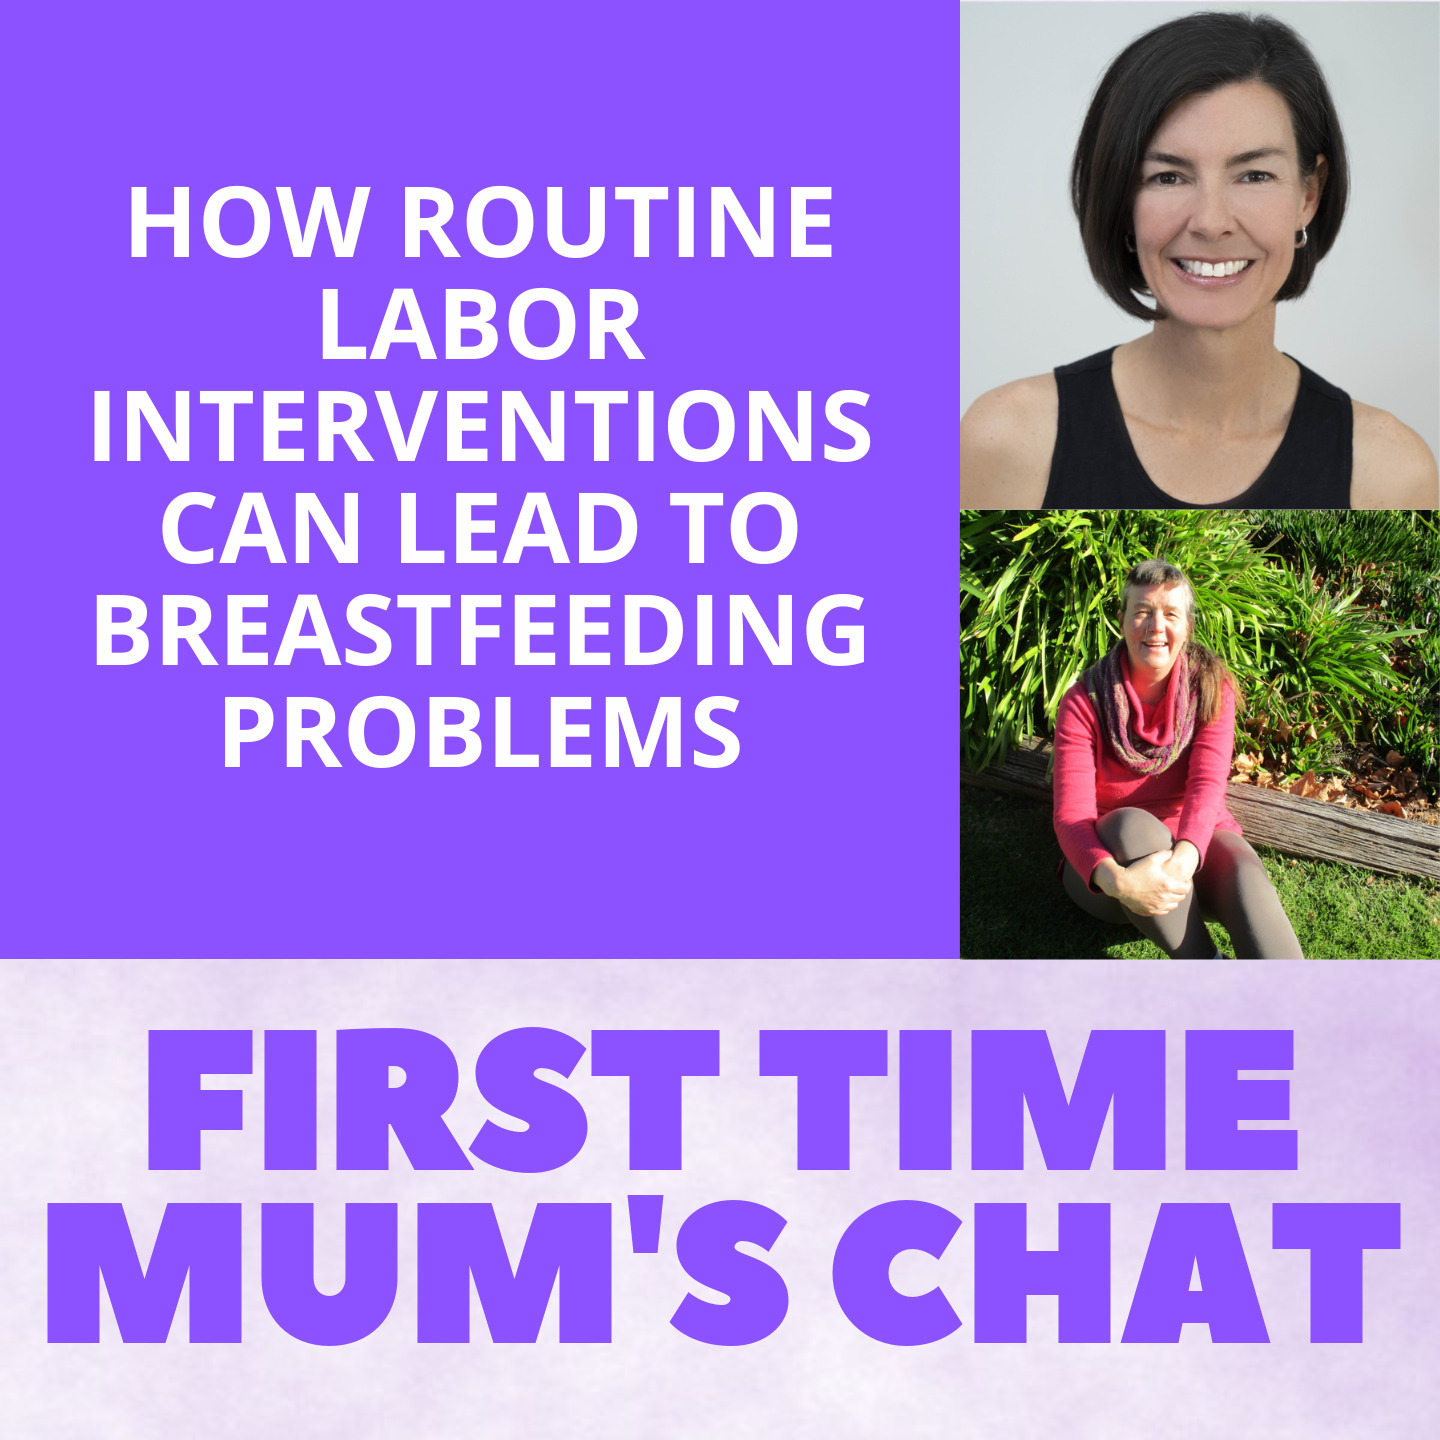 How Routine Labor Interventions Can Lead to Breastfeeding Problems